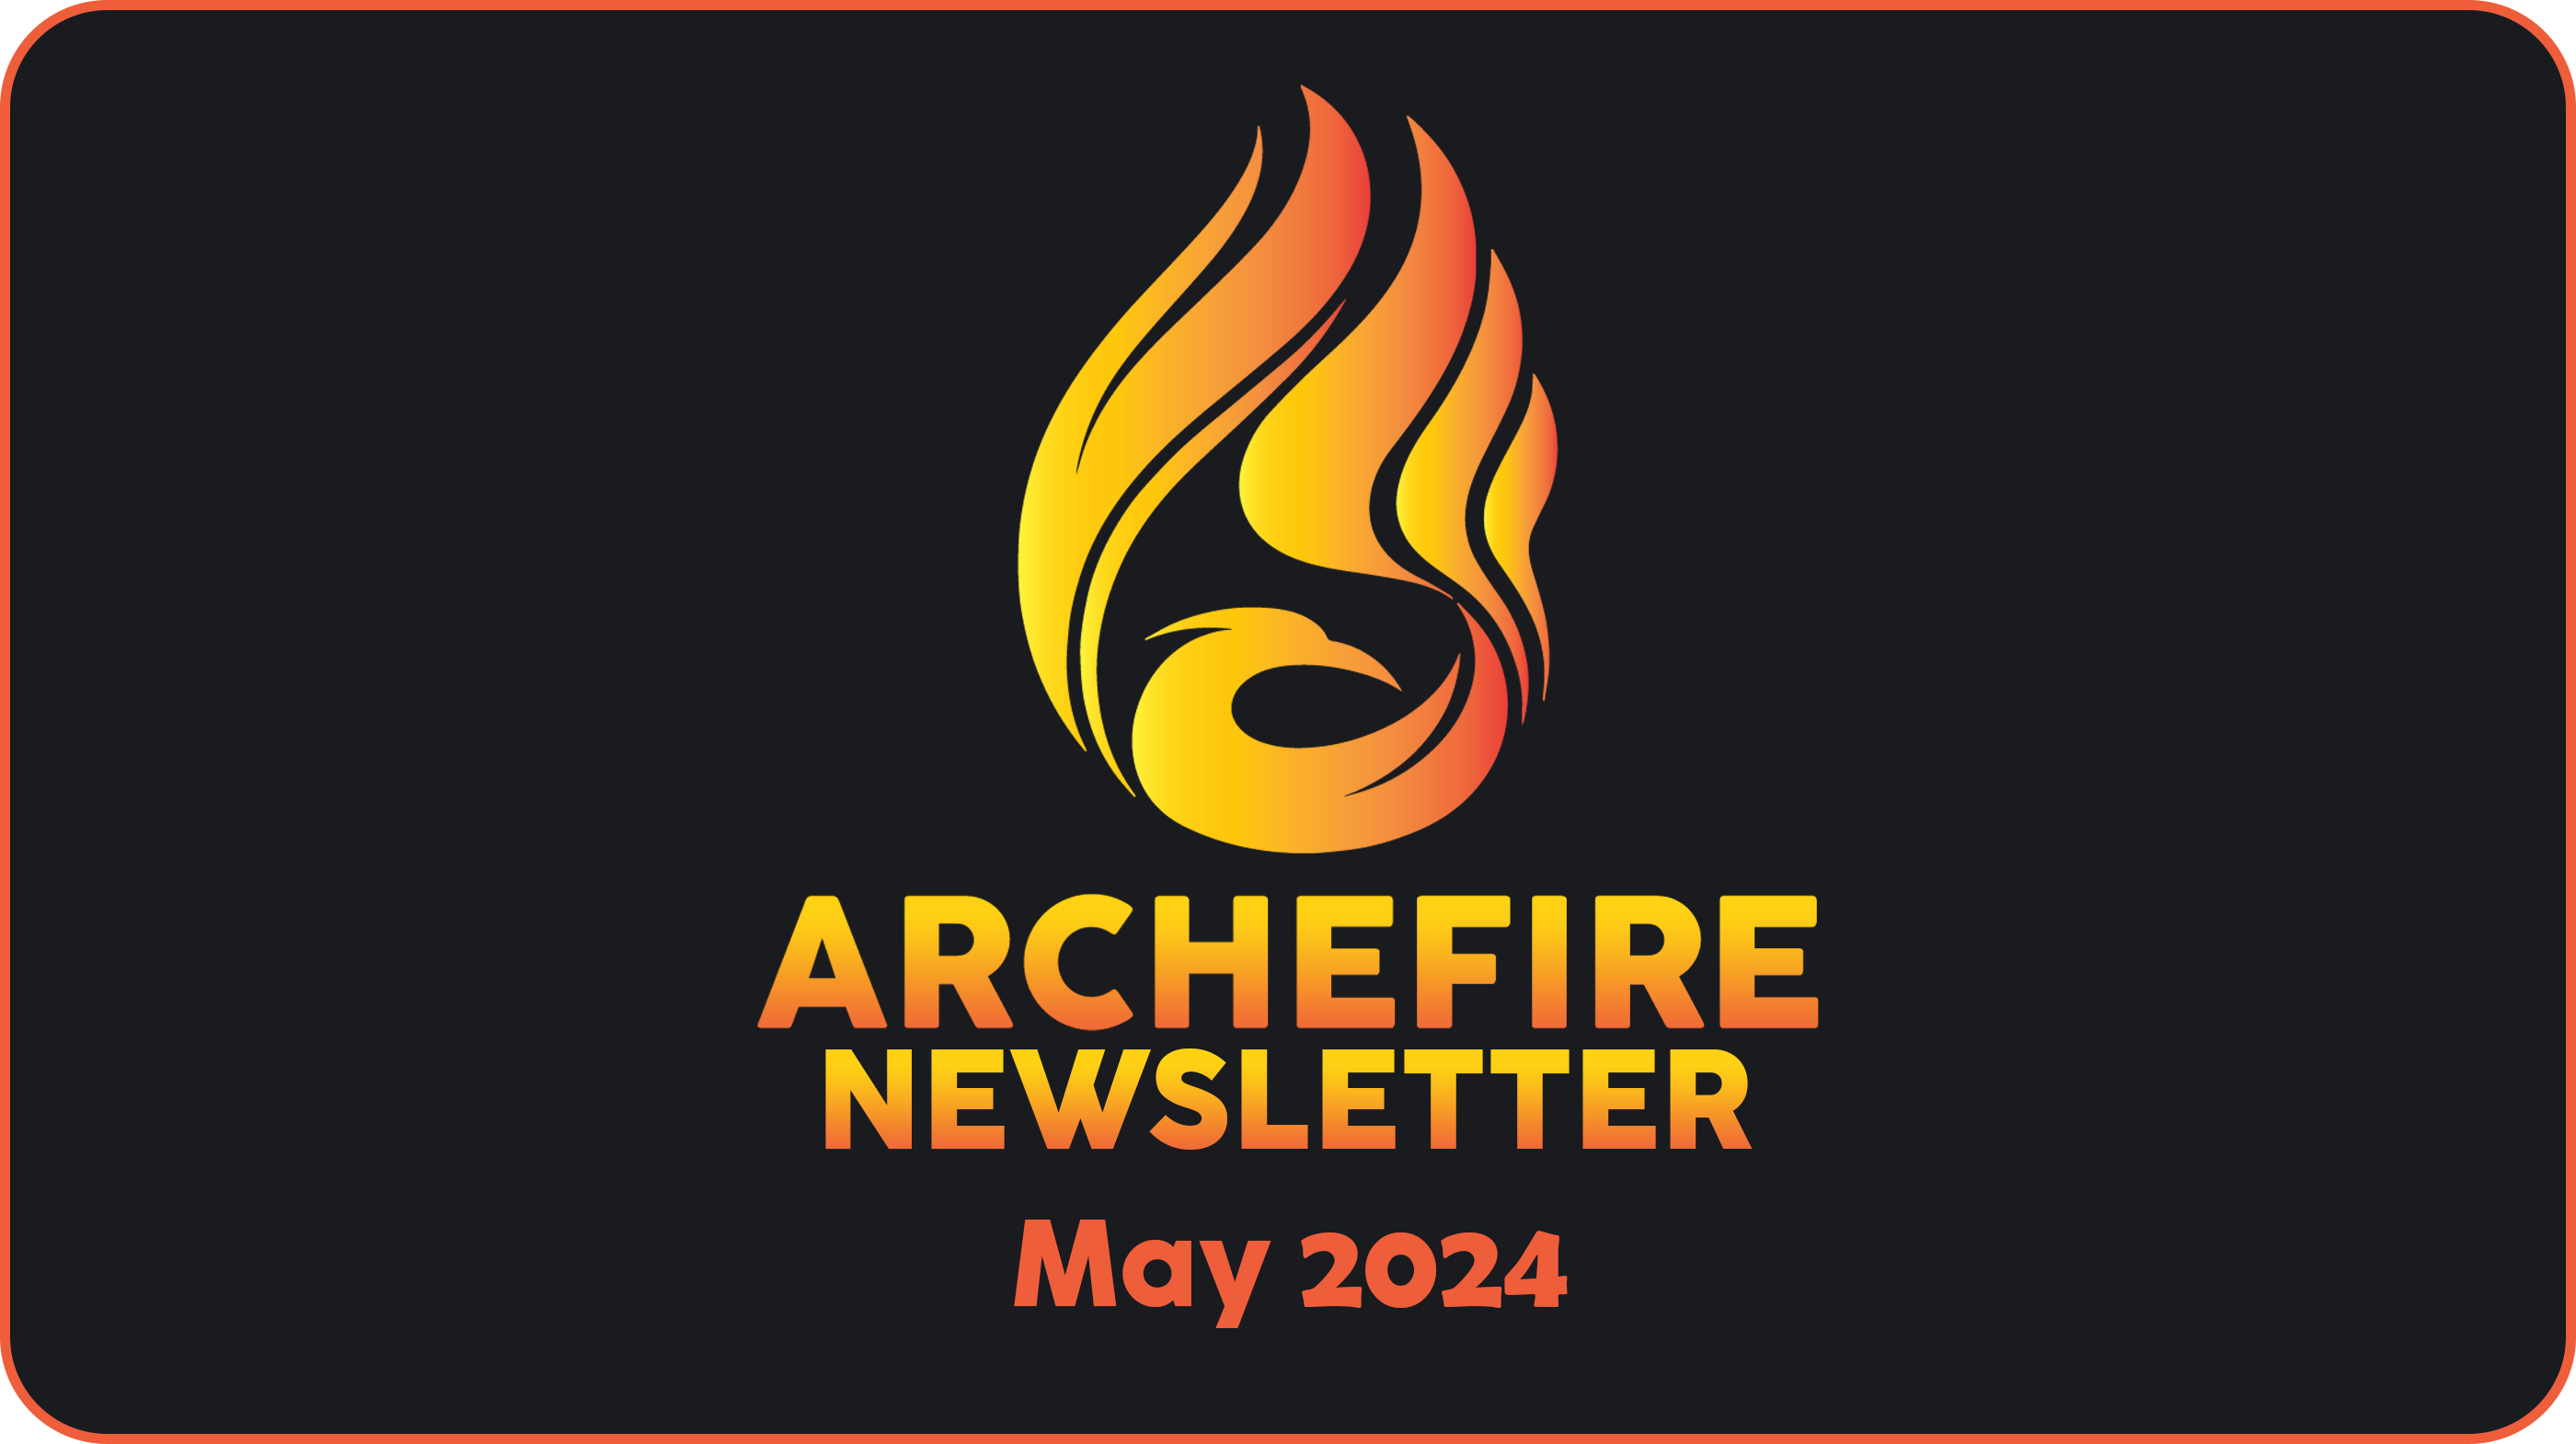 Archefire Newsletter - May 2024